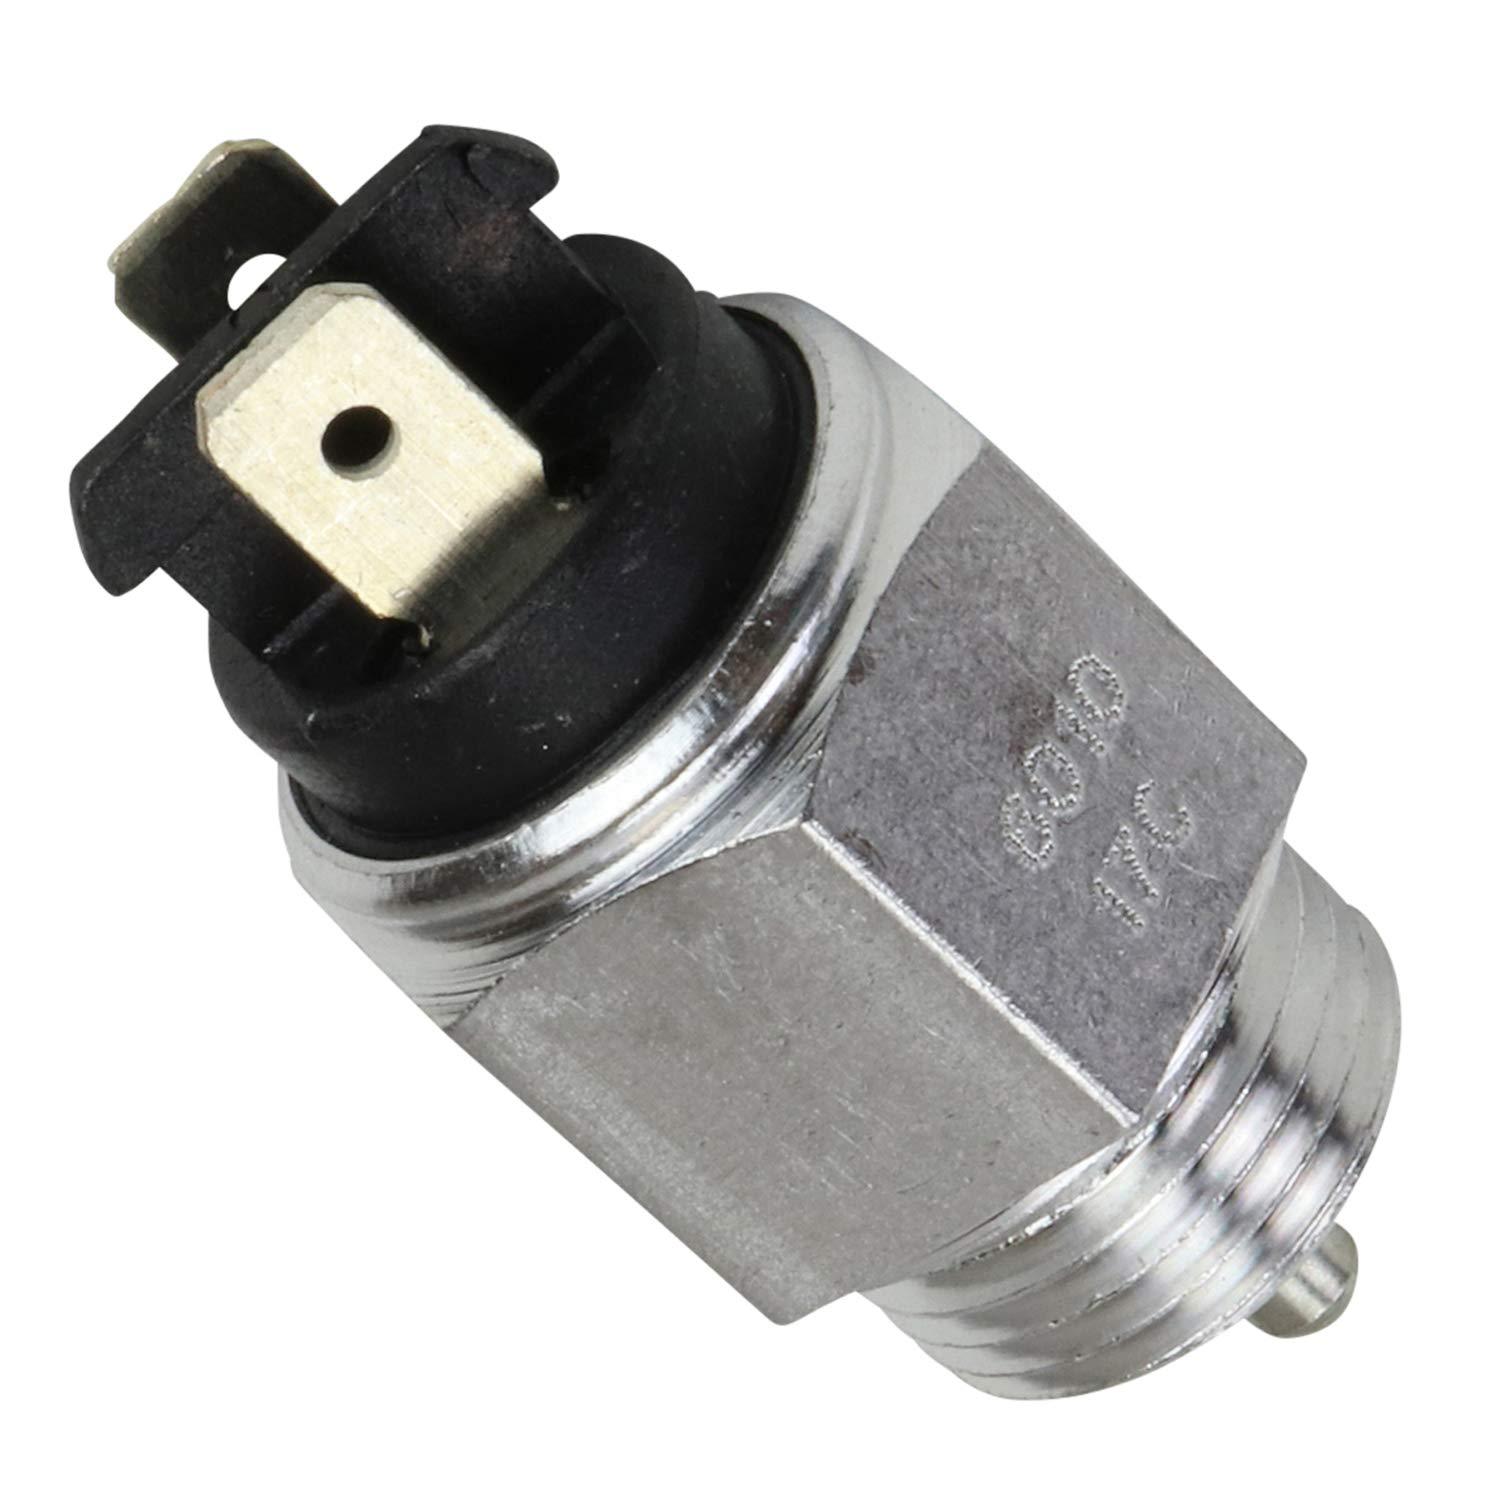 Primary image for Beck Arnley 201-1406 Back-Up Switch